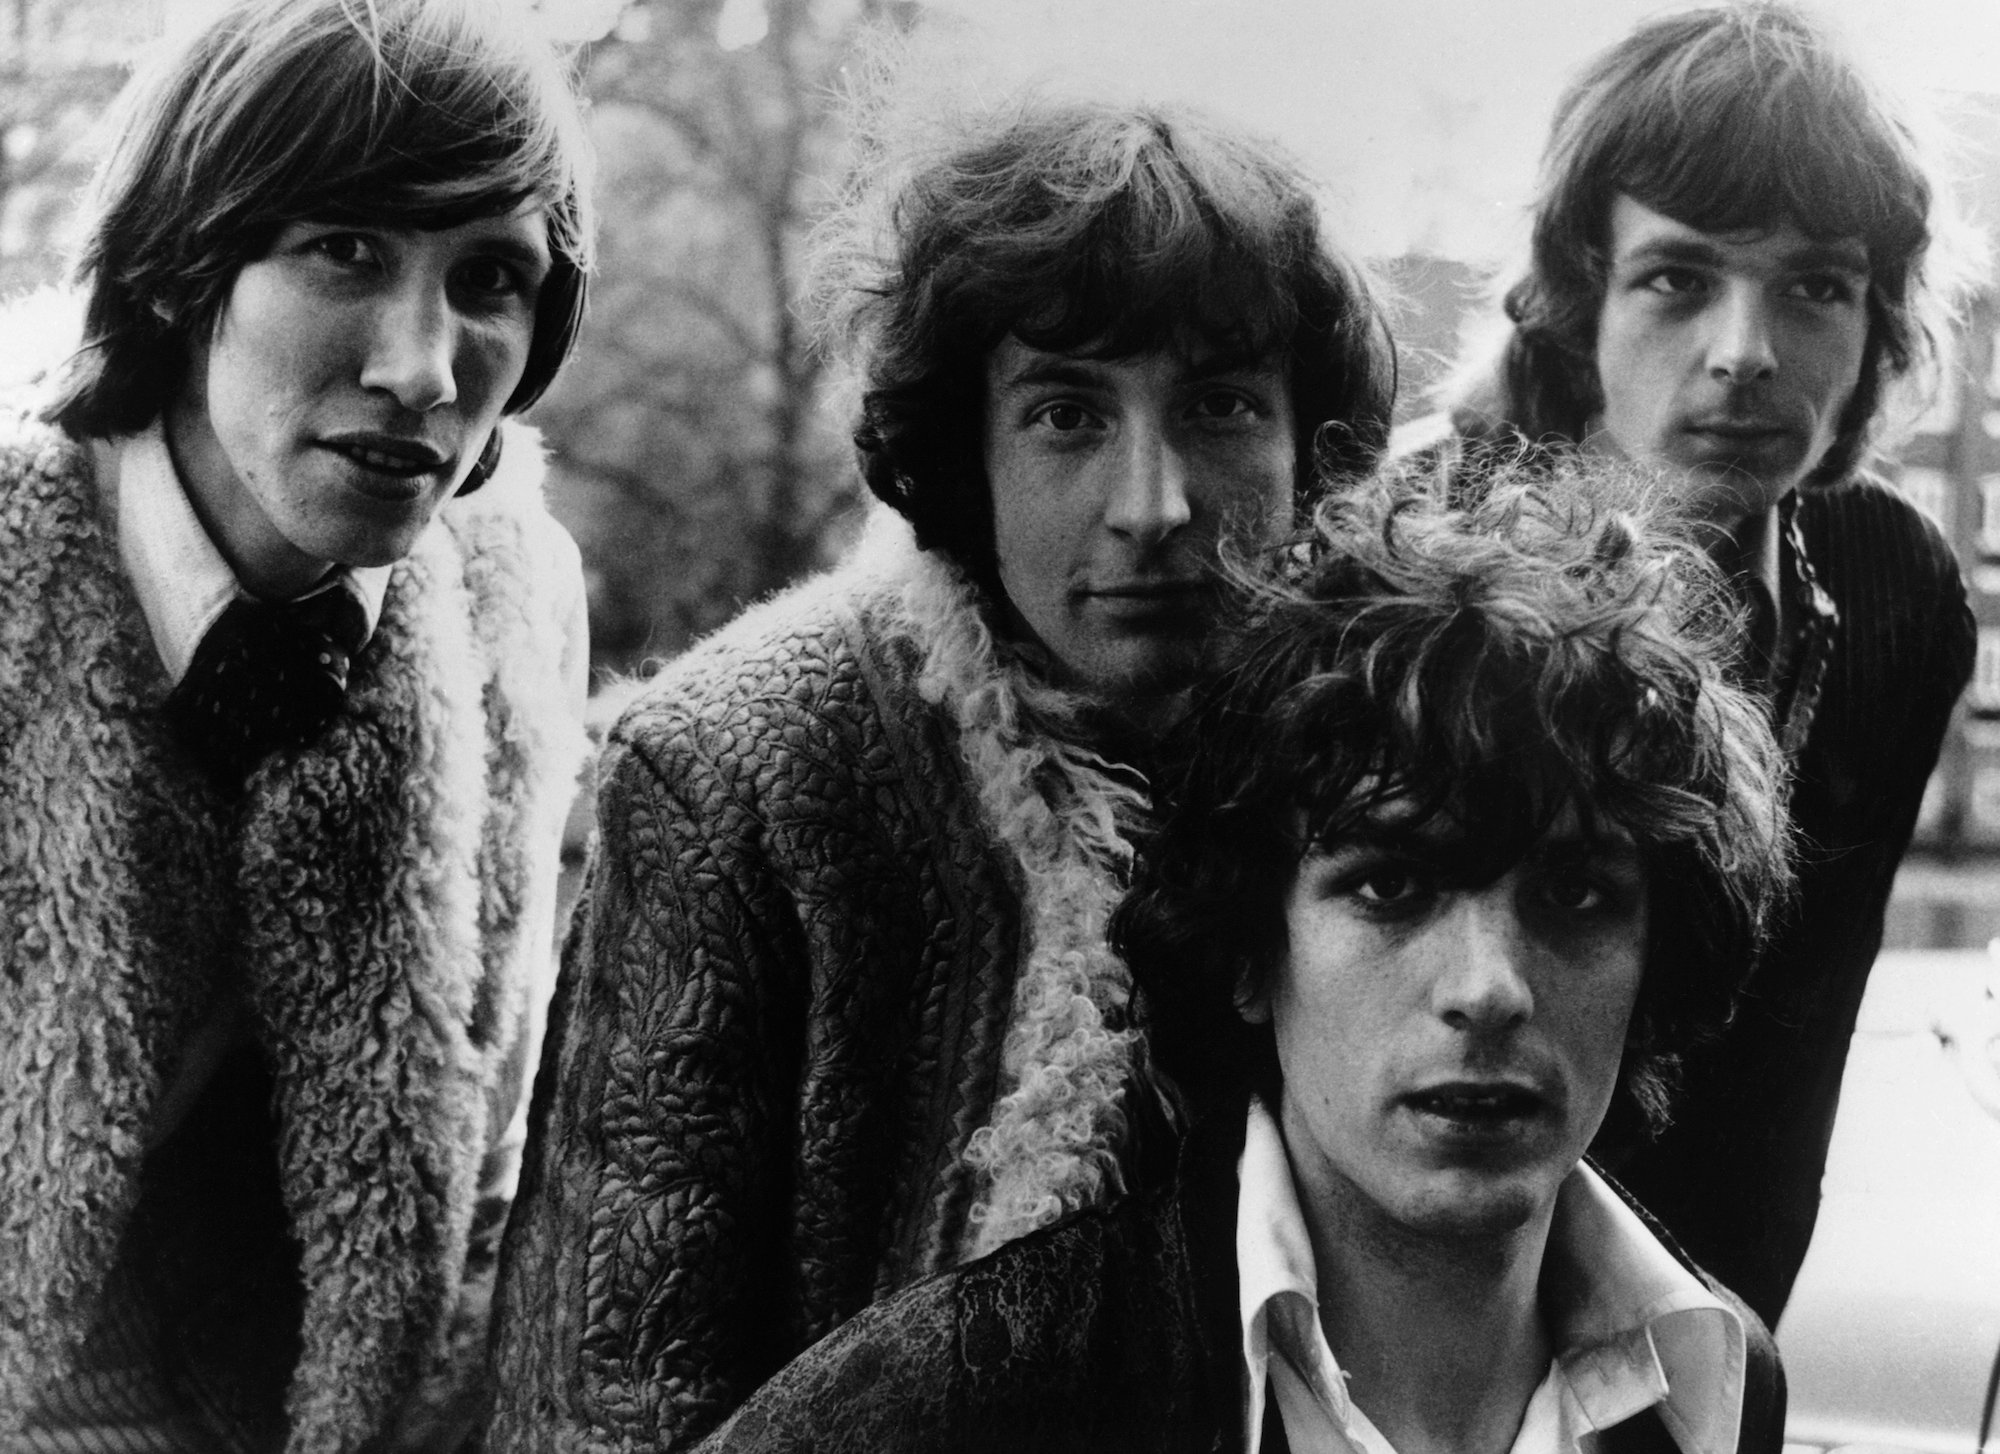 (L-R) Roger Waters, Nick Mason, Syd Barrett and Richard Wright smiling slightly, in black and white